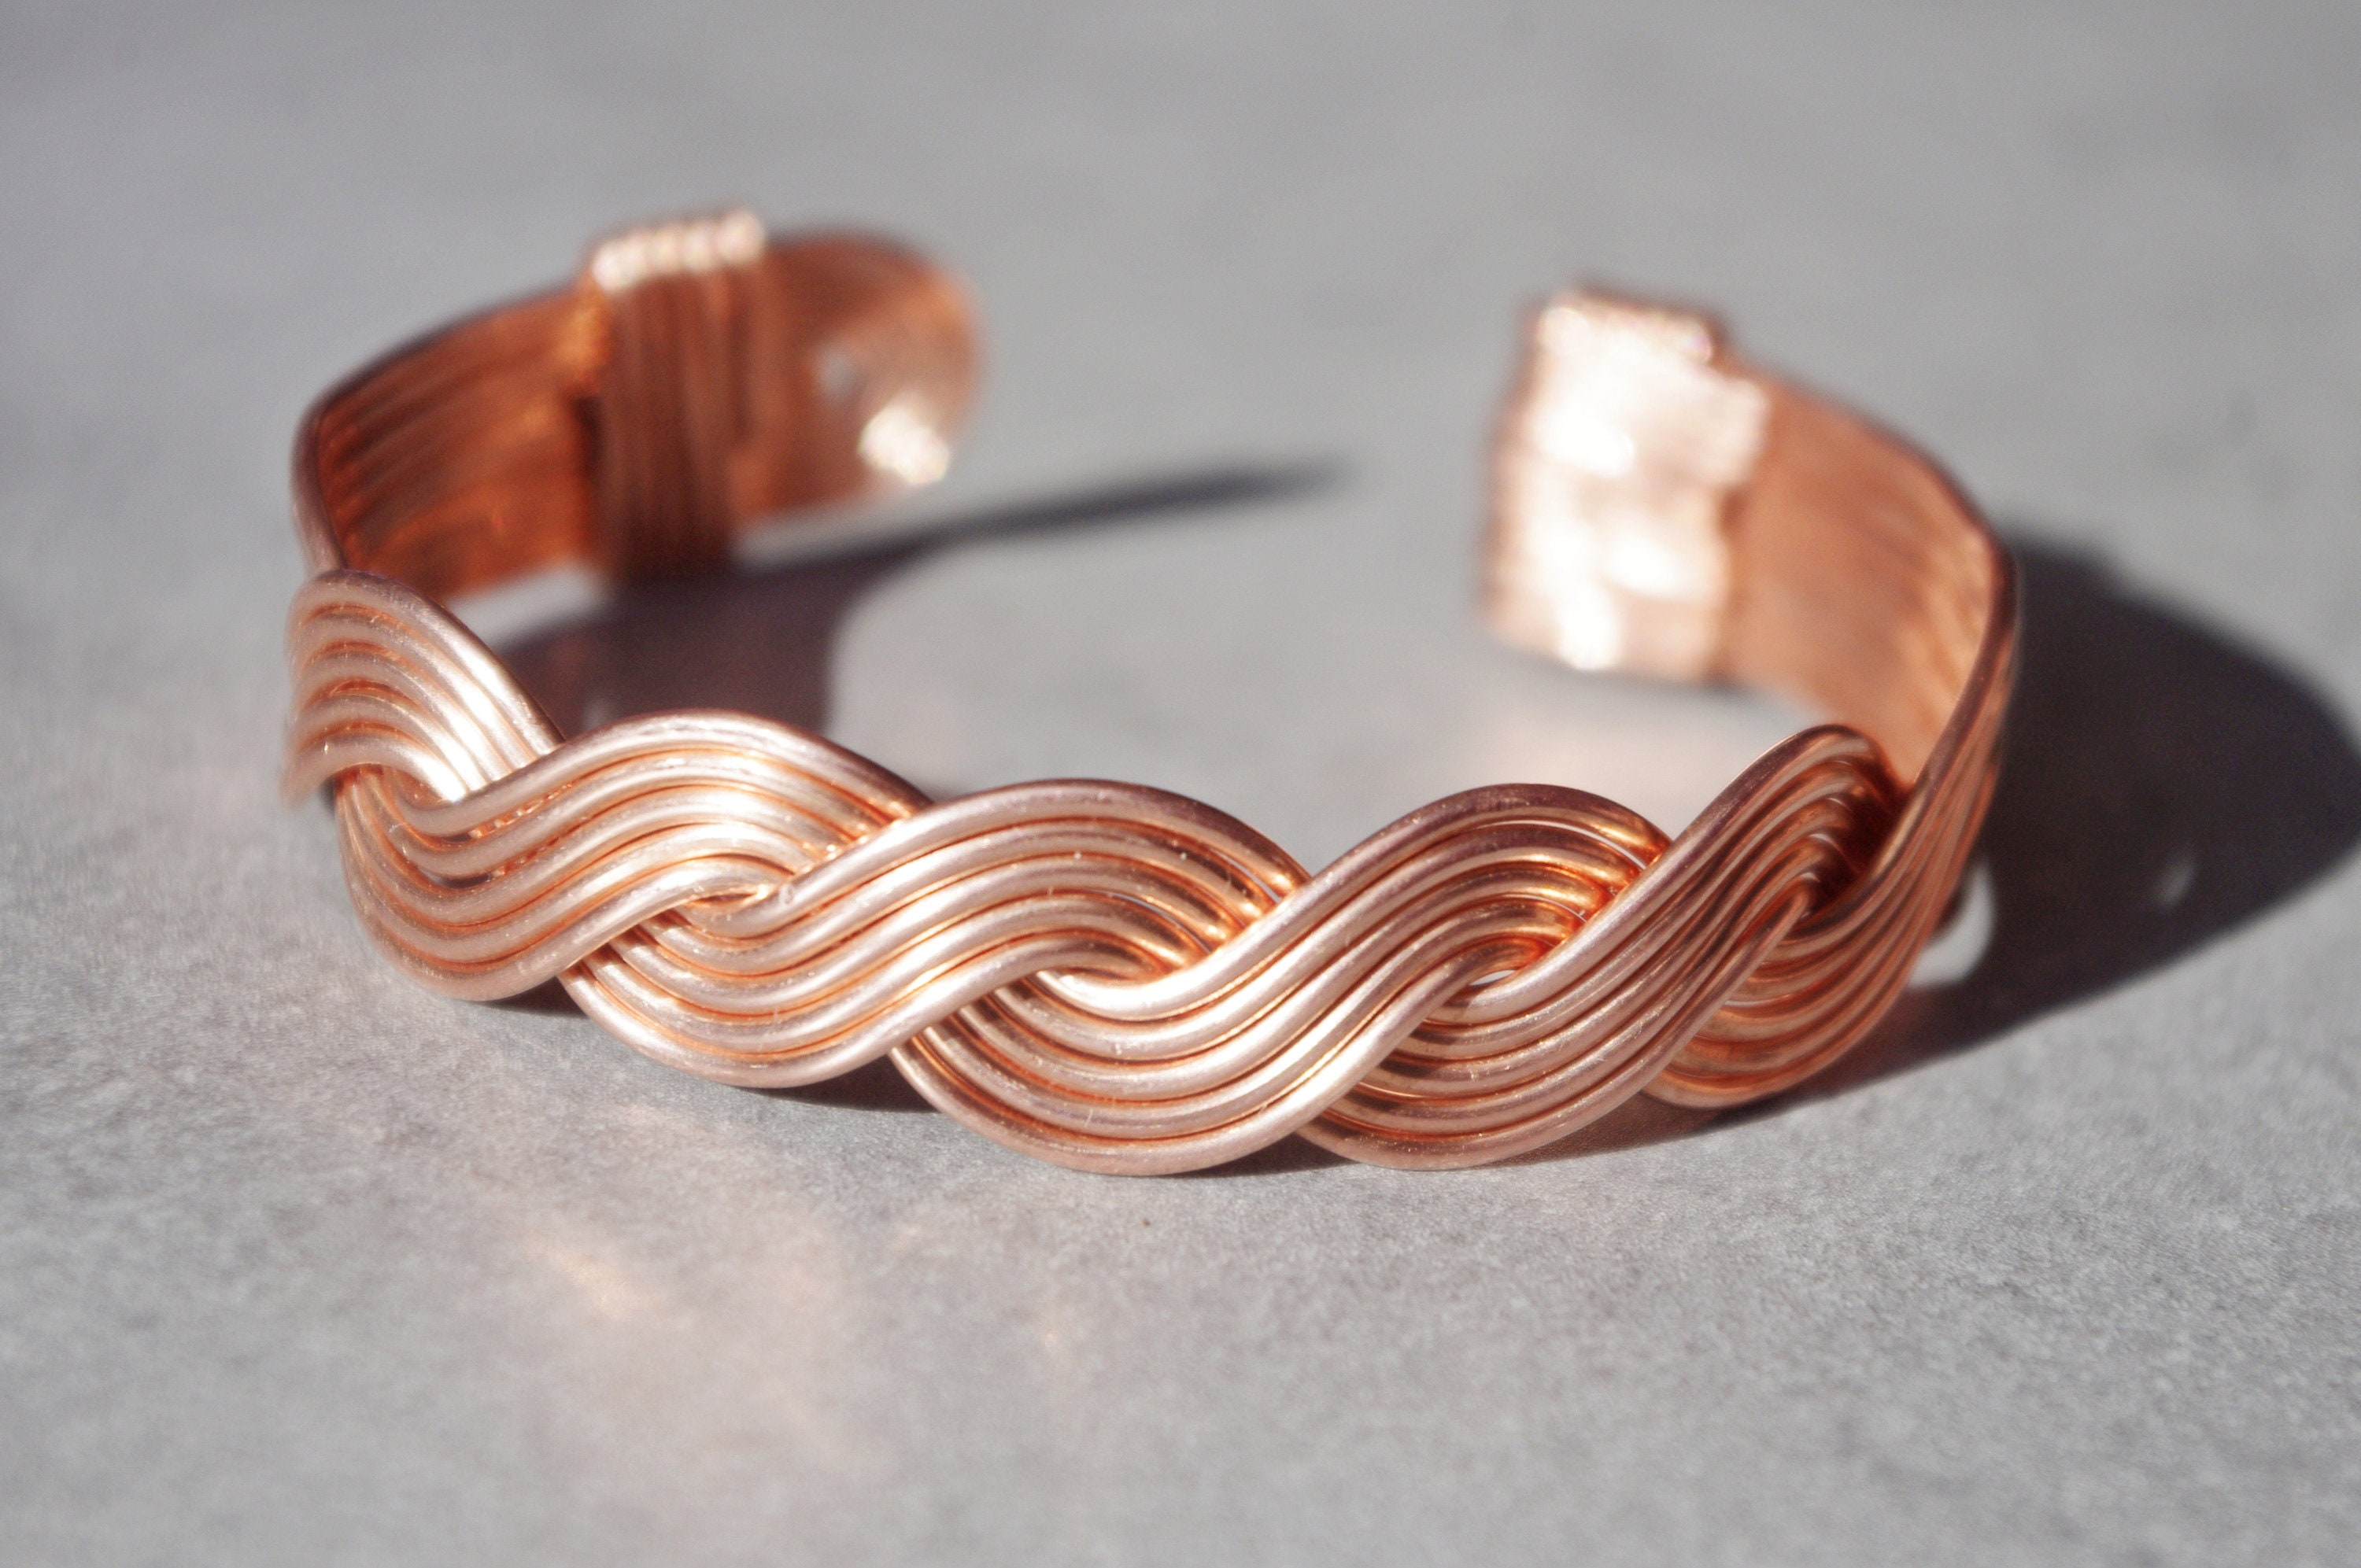 Amazon.com: Copper Cuff Wrist Wire Bracelet Handmade -Twisted Wire Pattern  : Everything Else